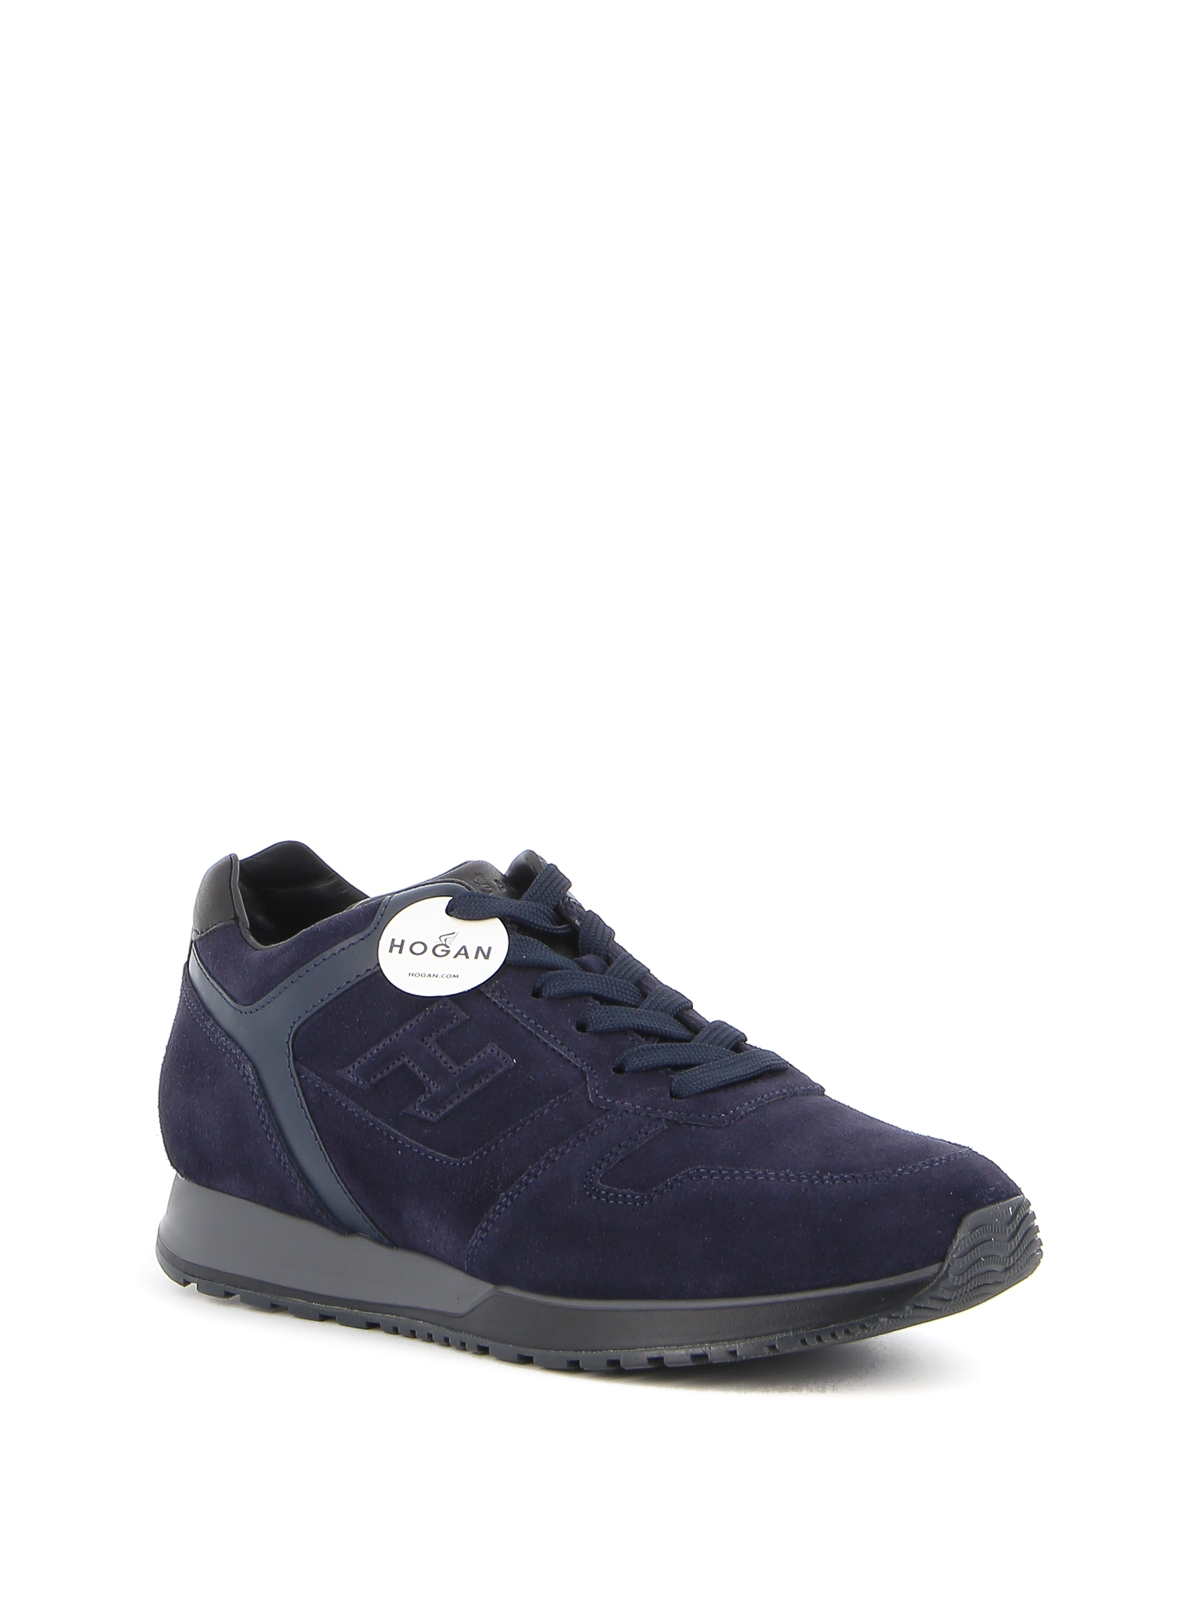 Trainers Hogan - H321 sneakers - HXM3210Y853OED4126 | Shop online at iKRIX